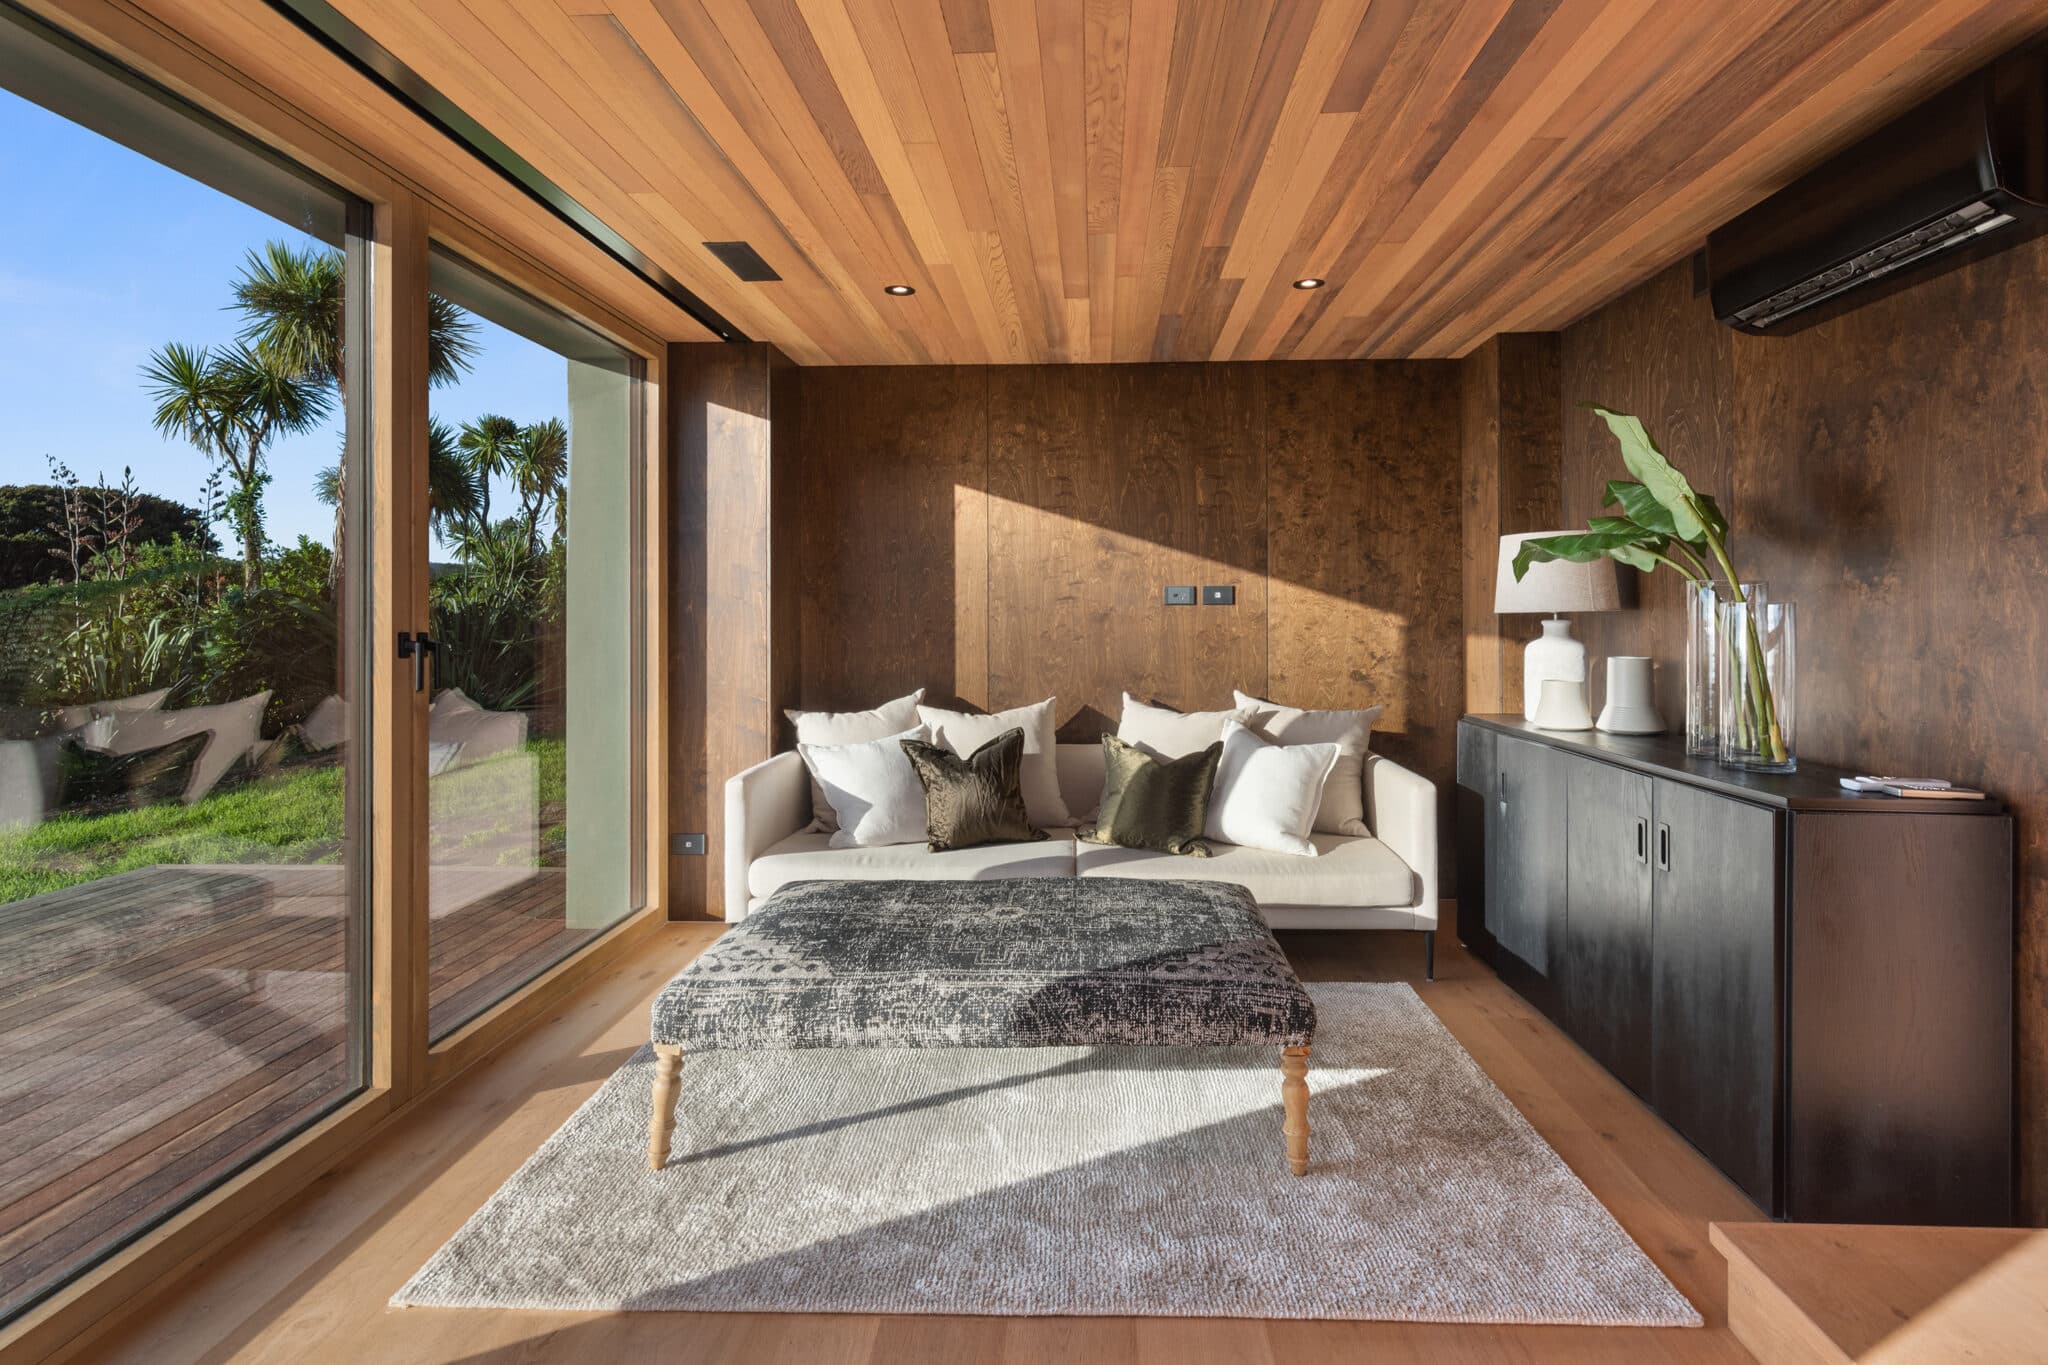 Bruyere Passive Homes, a National House of the Year winner